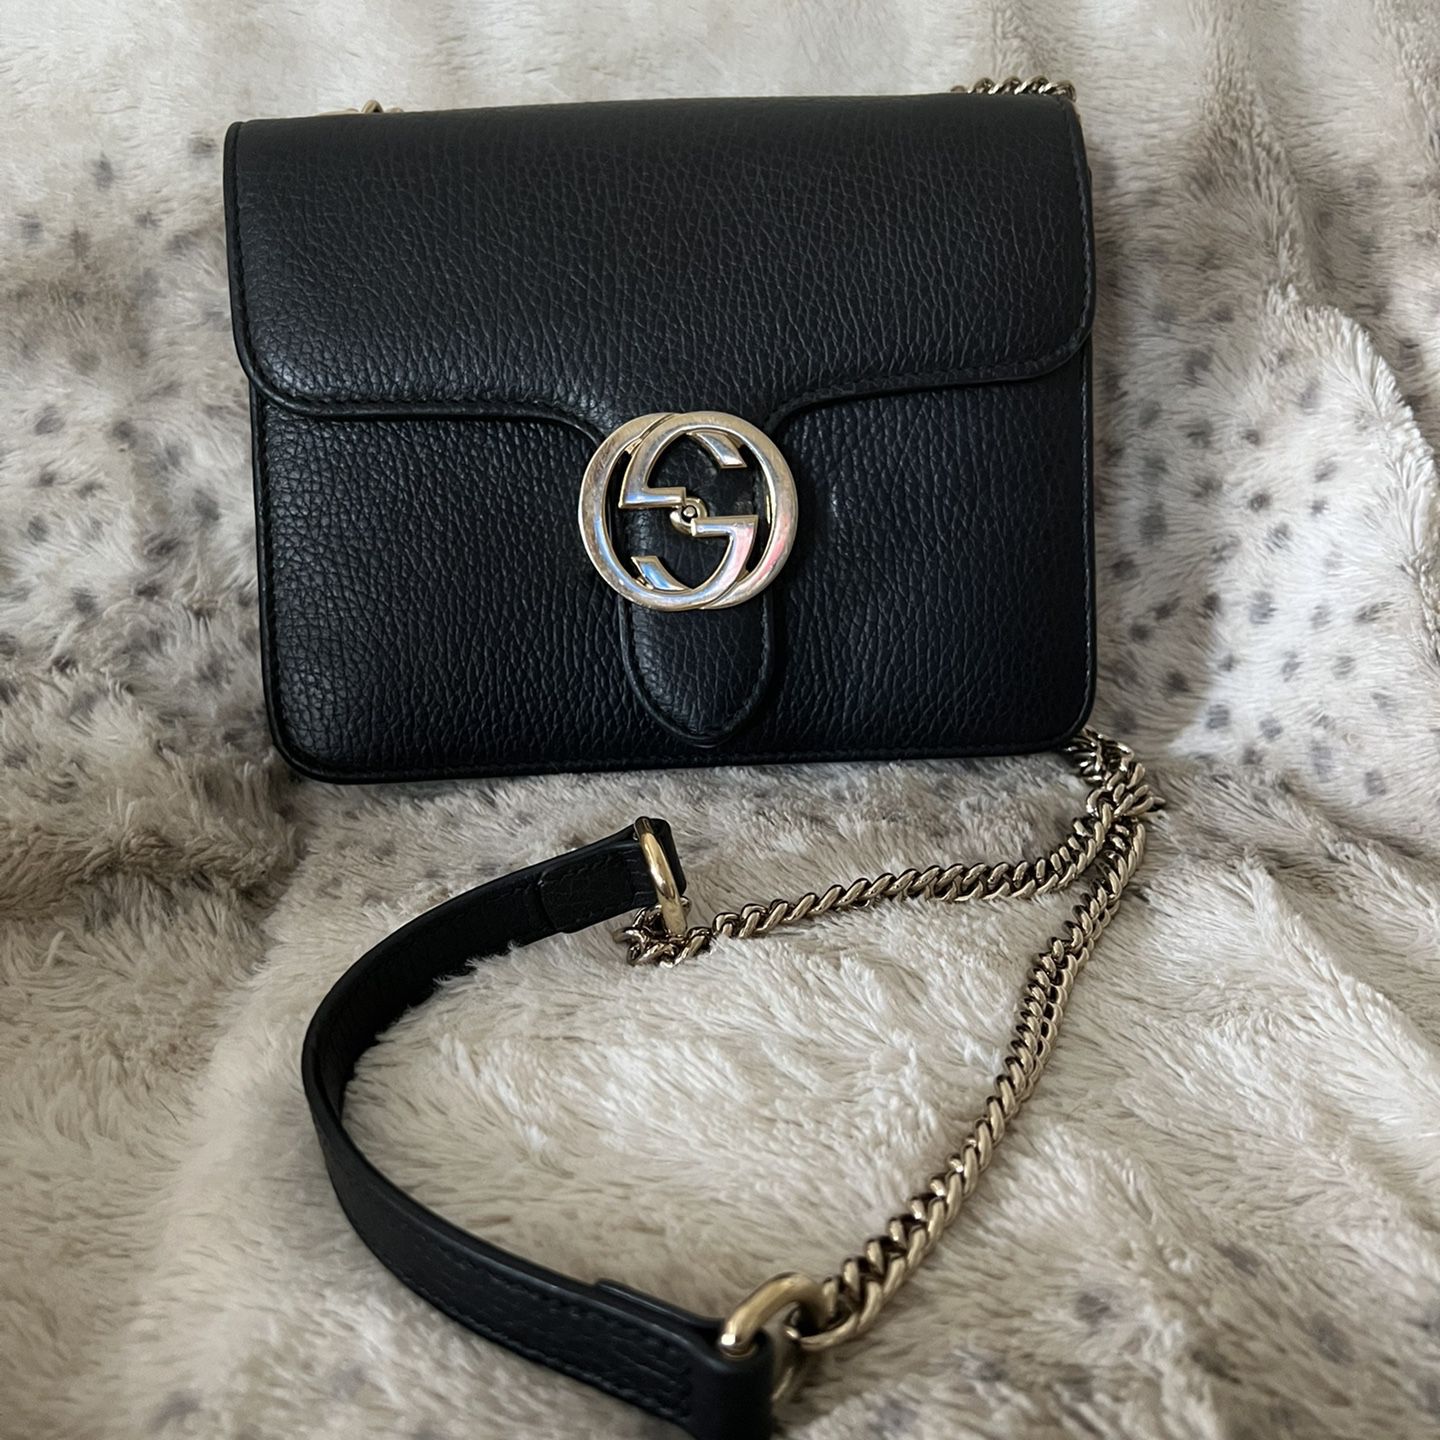 Louie Vuitton Purse for Sale in Plano, TX - OfferUp